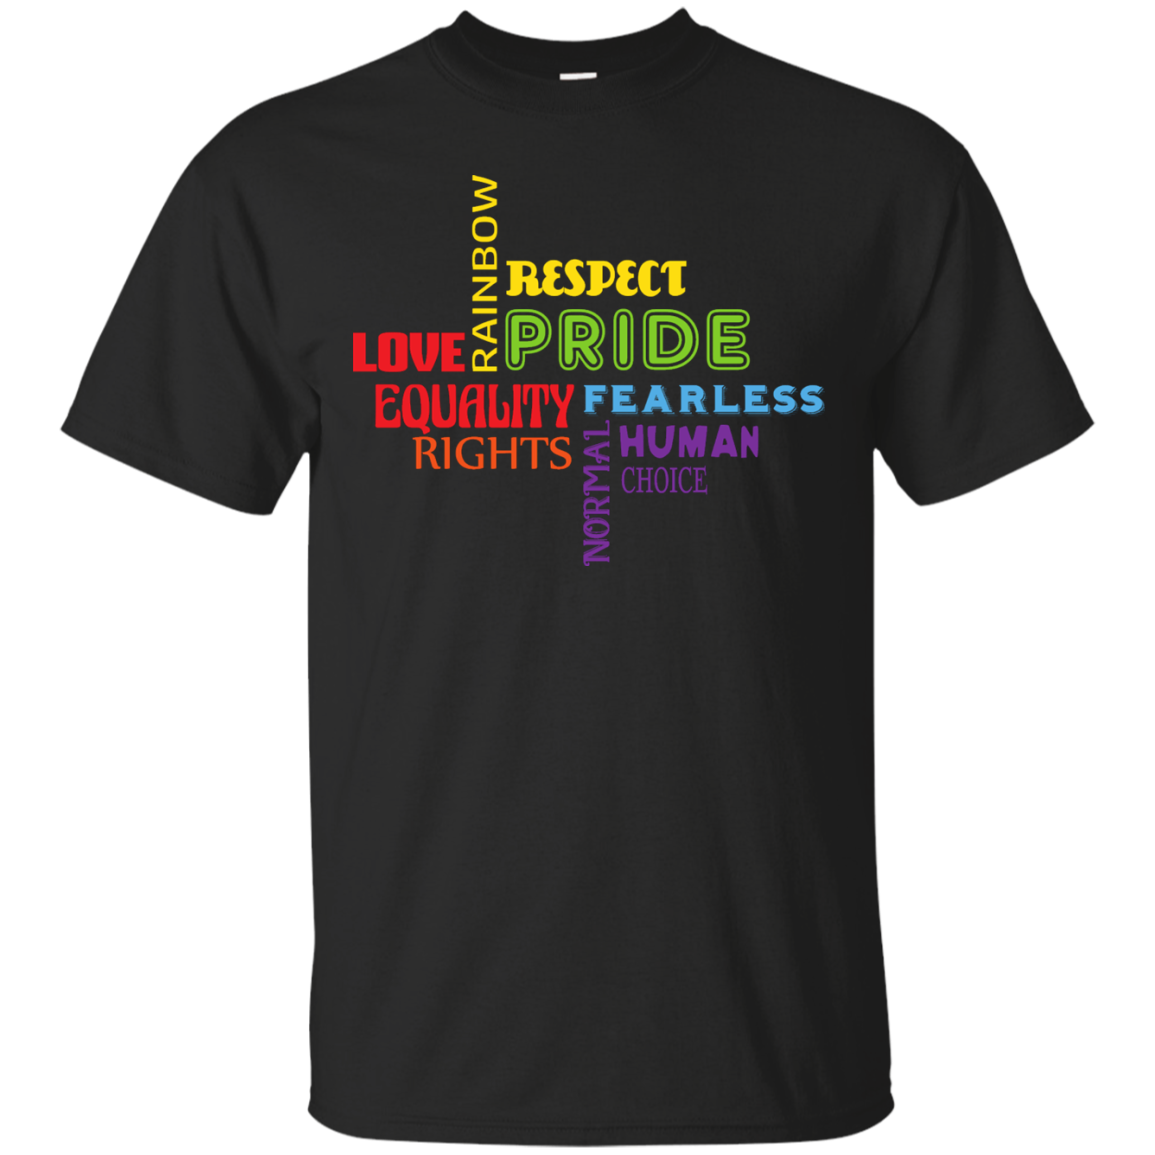 "Love Equality Rights" T Shirt for LGBT Community